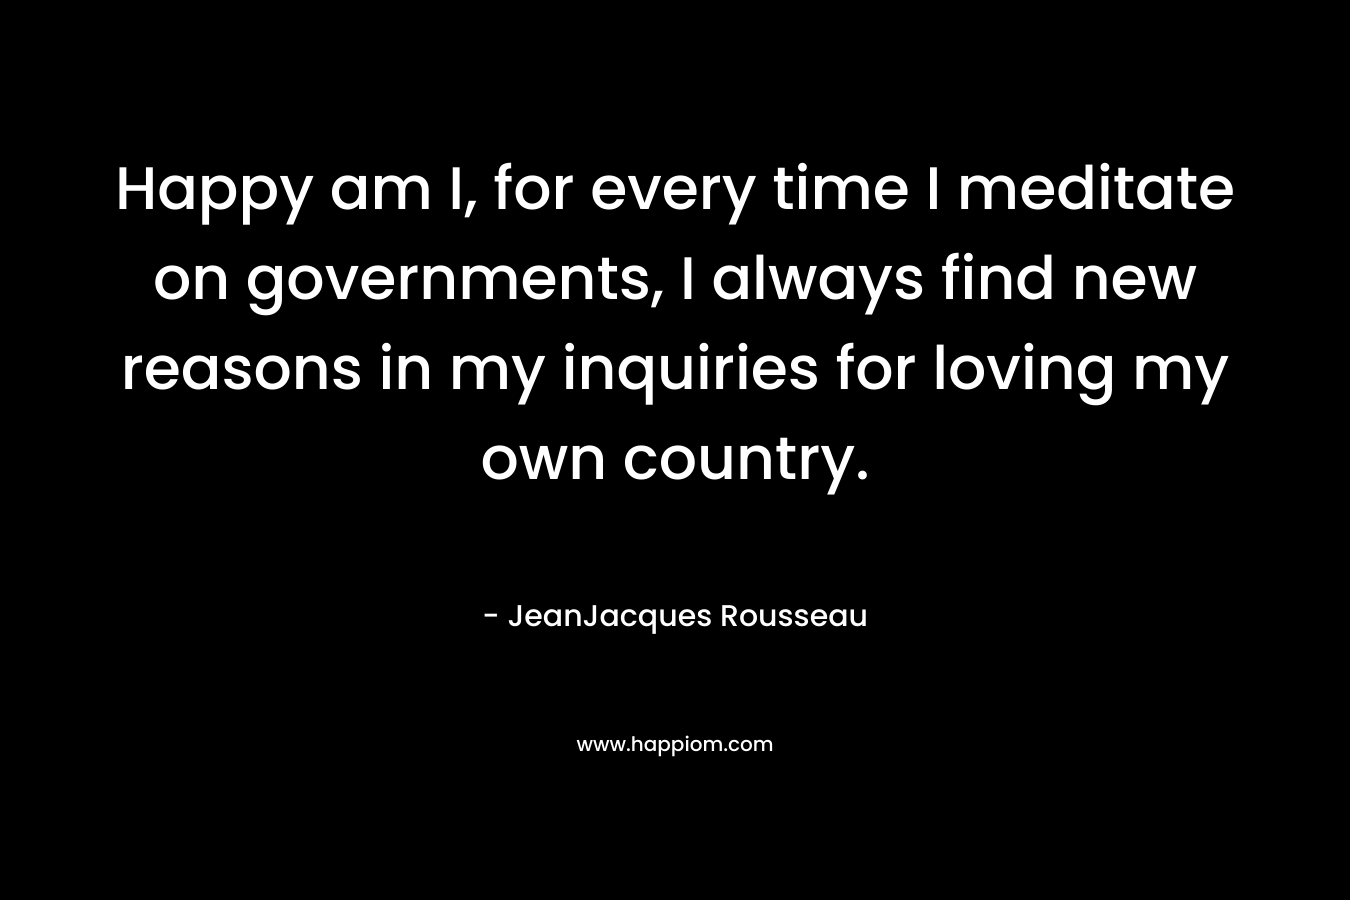 Happy am I, for every time I meditate on governments, I always find new reasons in my inquiries for loving my own country. – JeanJacques Rousseau